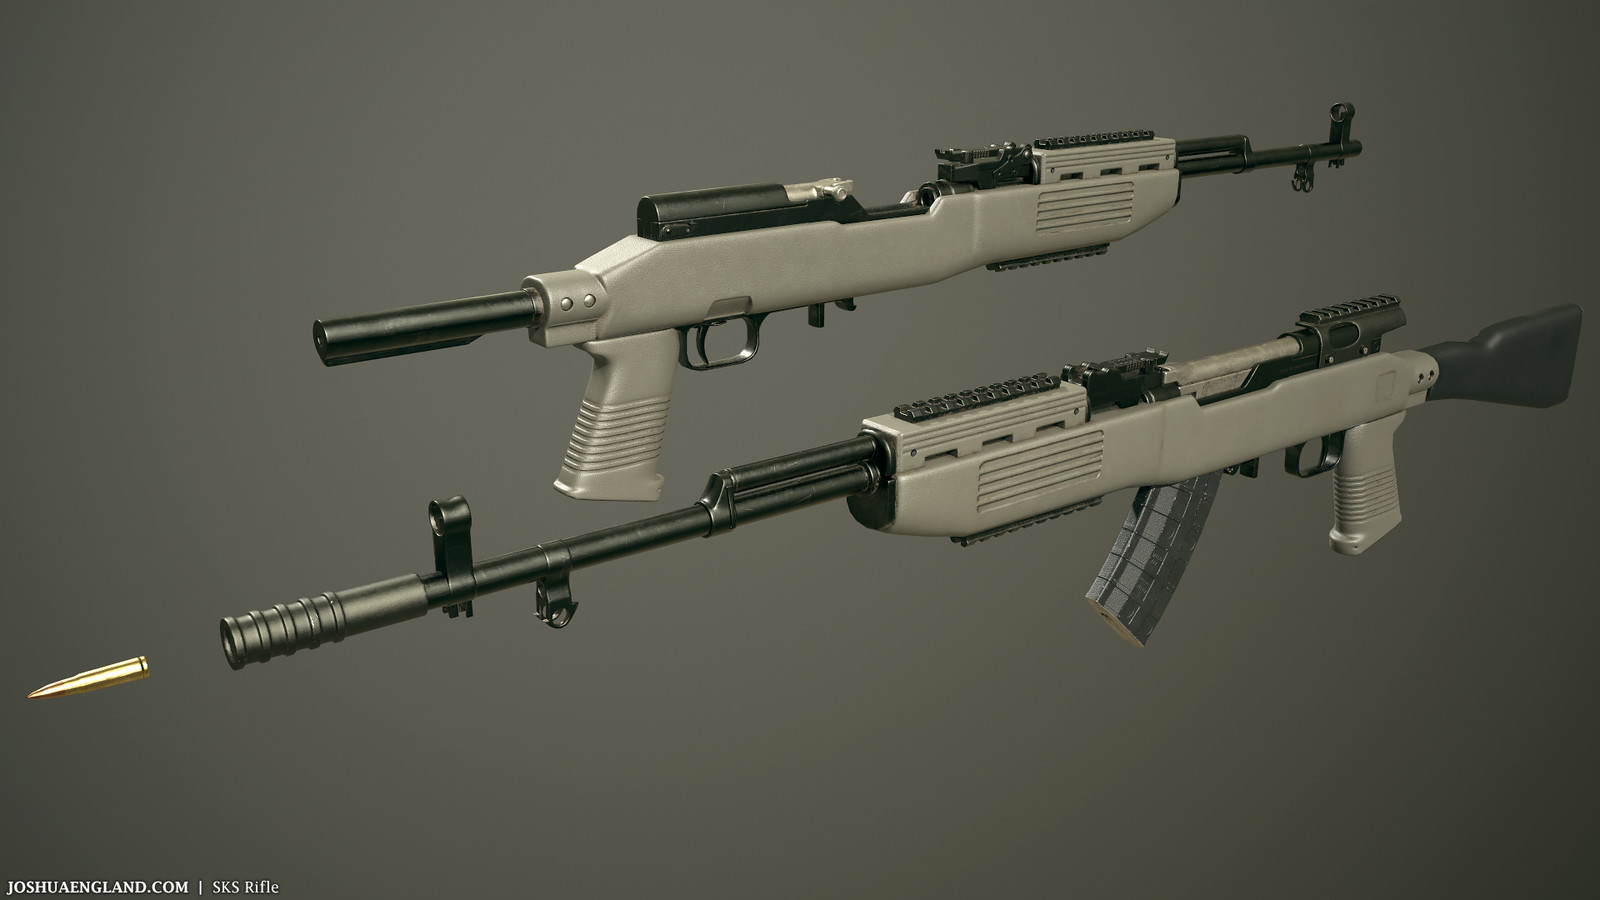 Eventually the SKS ended up in PlayerUnknown's Battlegrounds (PubG). 